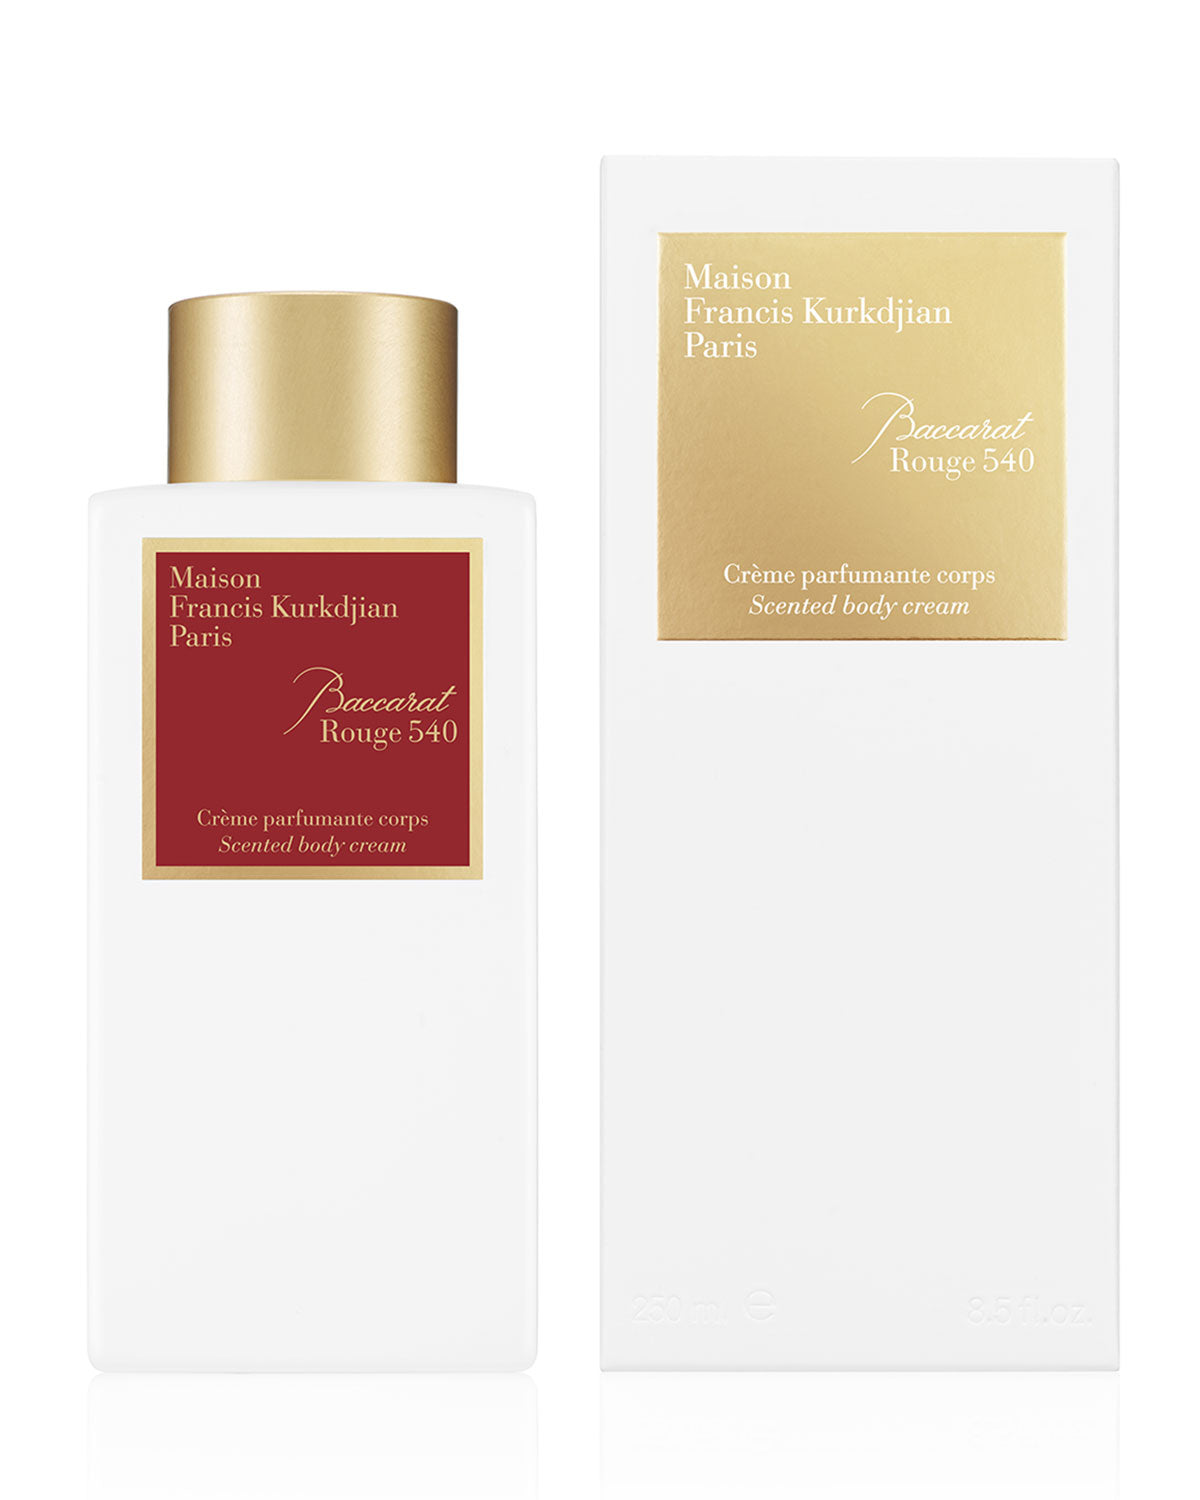 Baccarat Rouge 540 - Scented body cream